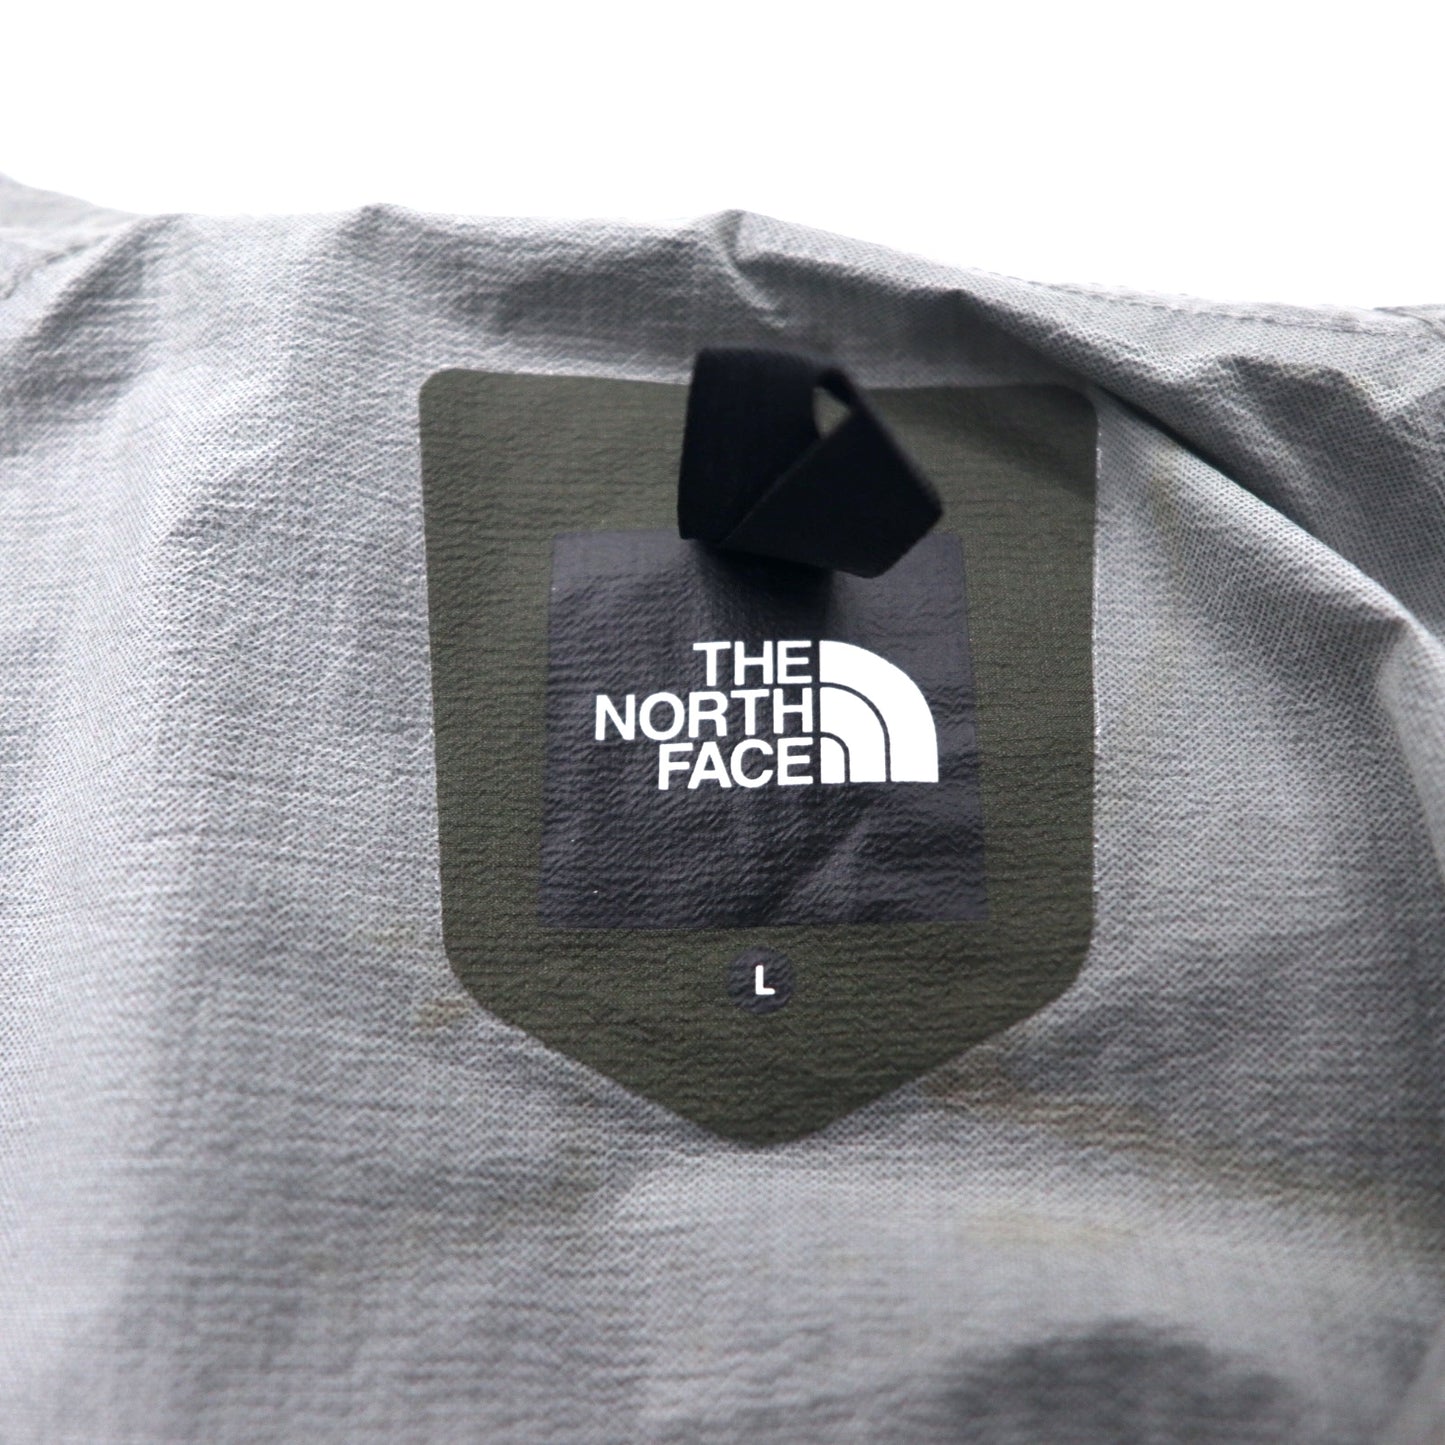 THE NORTH FACE マウンテンパーカー L カーキ ナイロン 防水 Mountain Parka NP12035